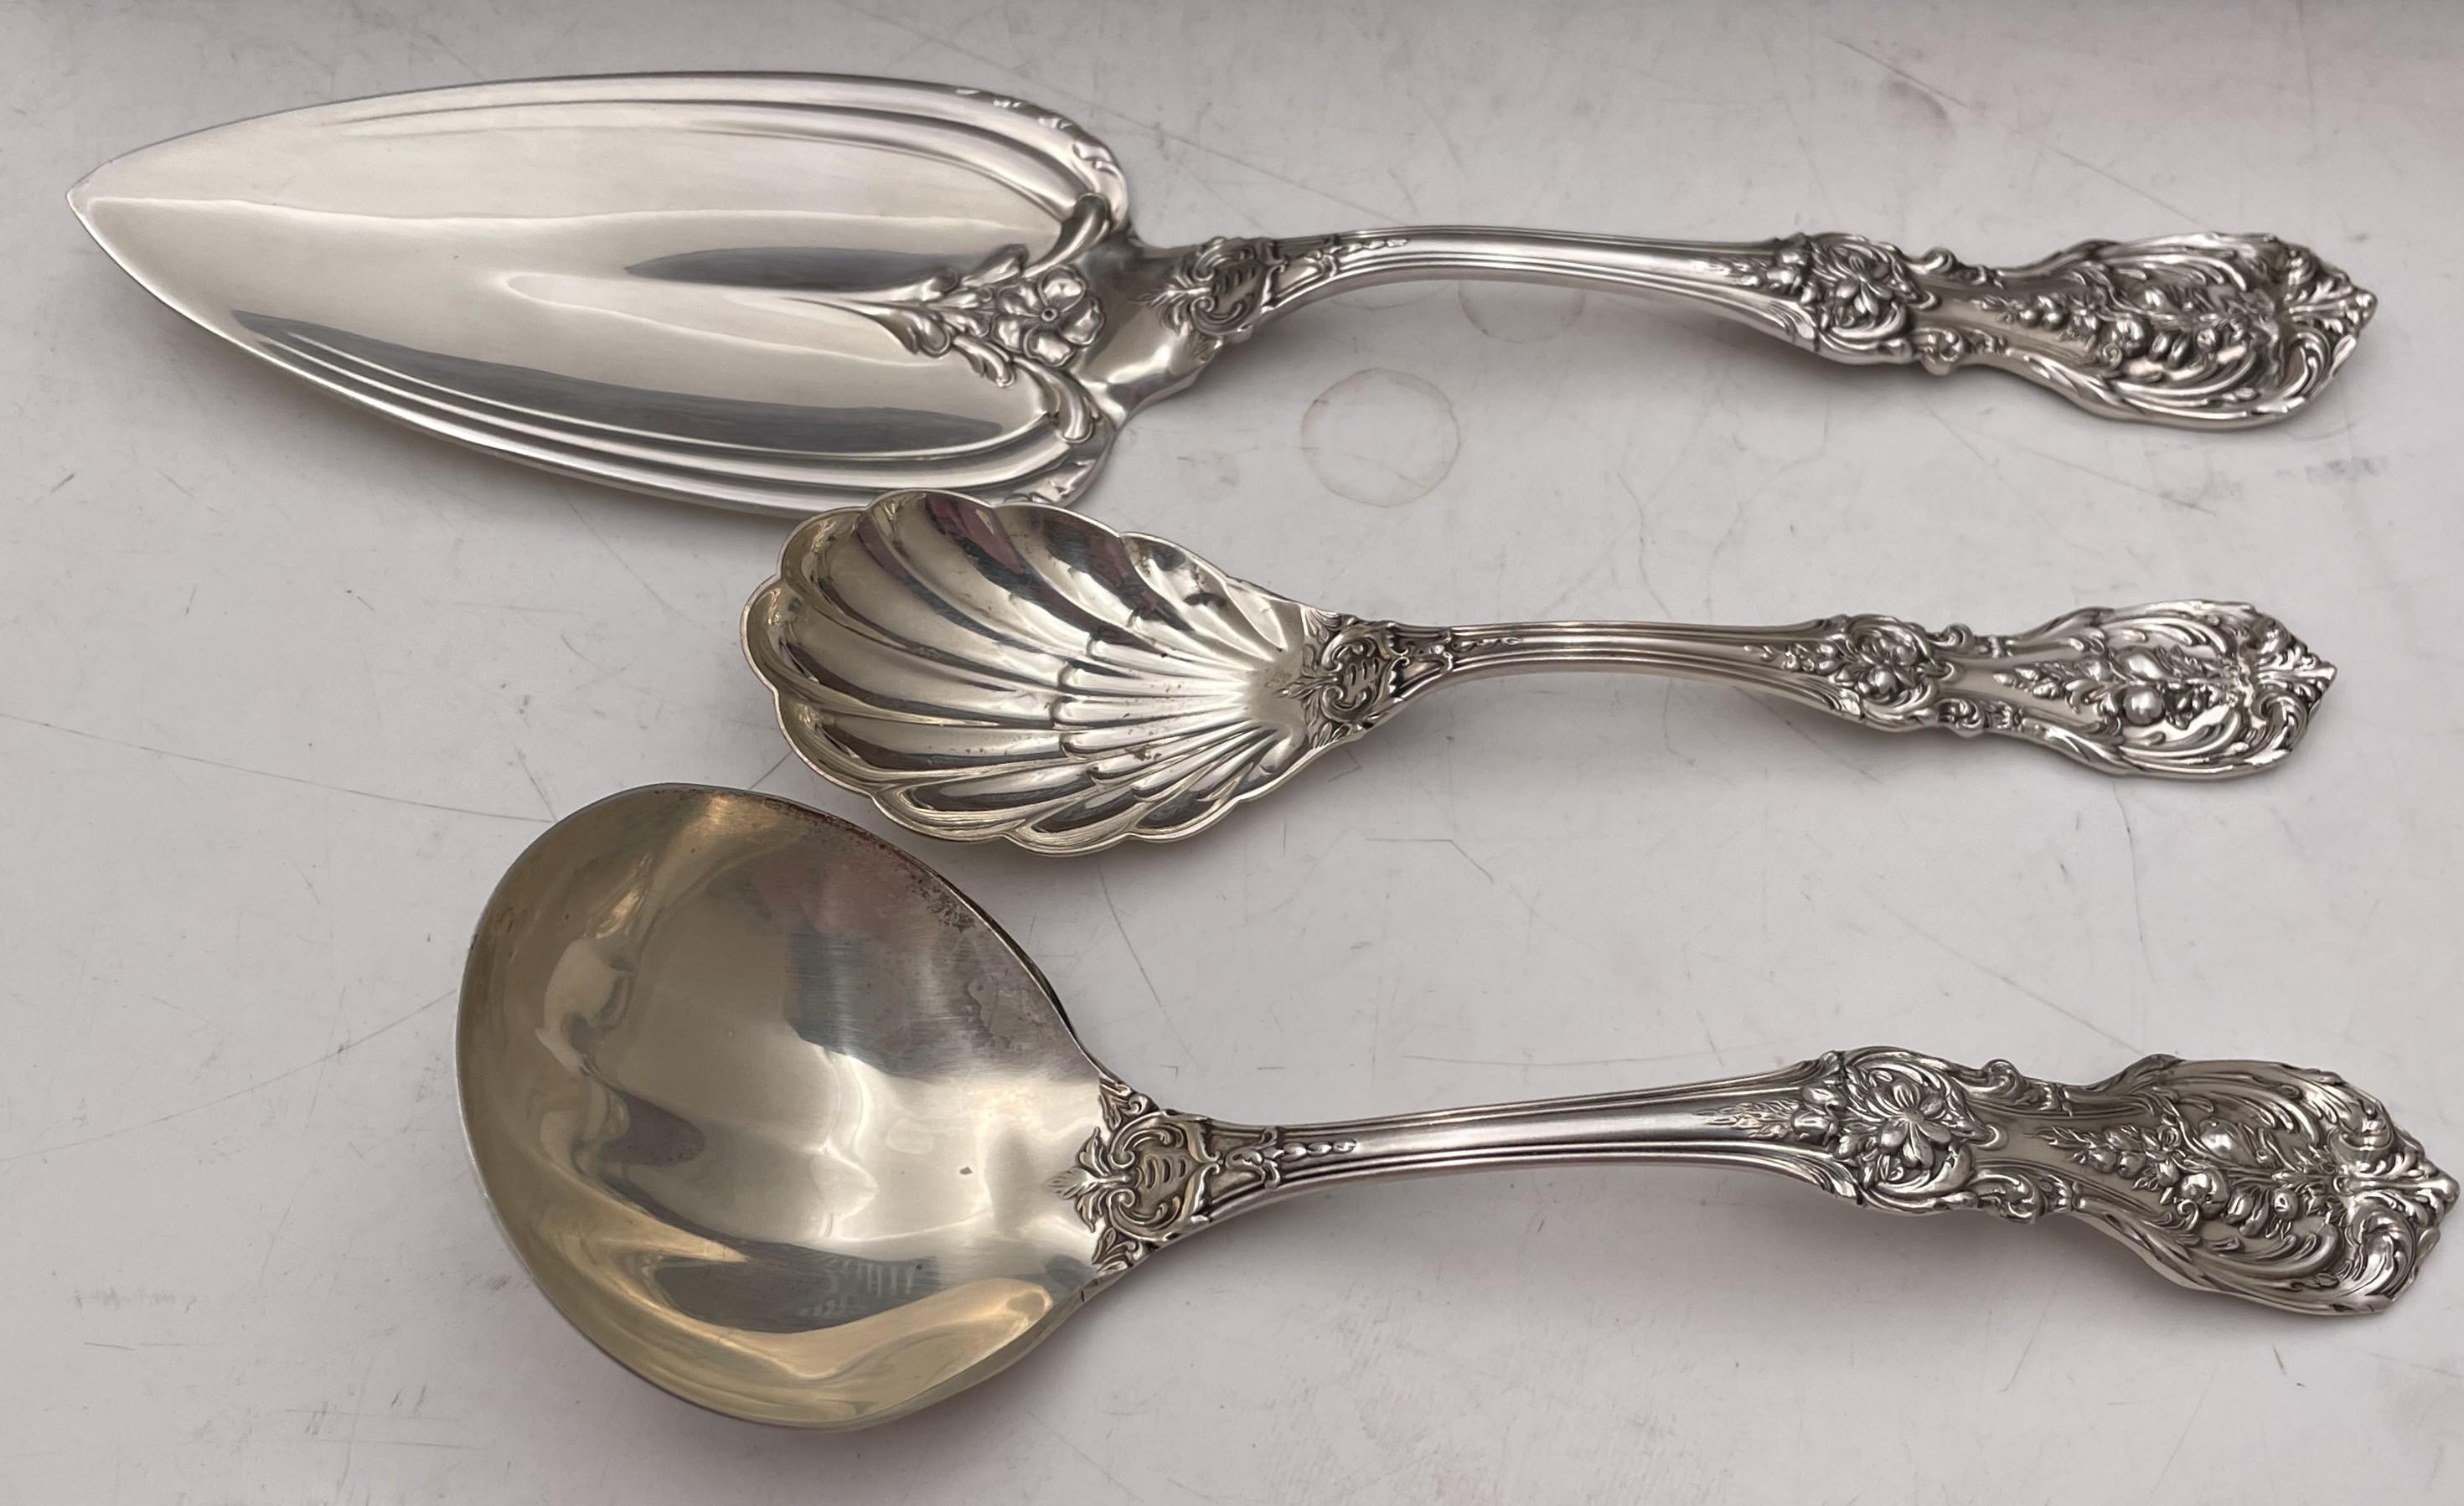 reed and barton sterling silver flatware patterns